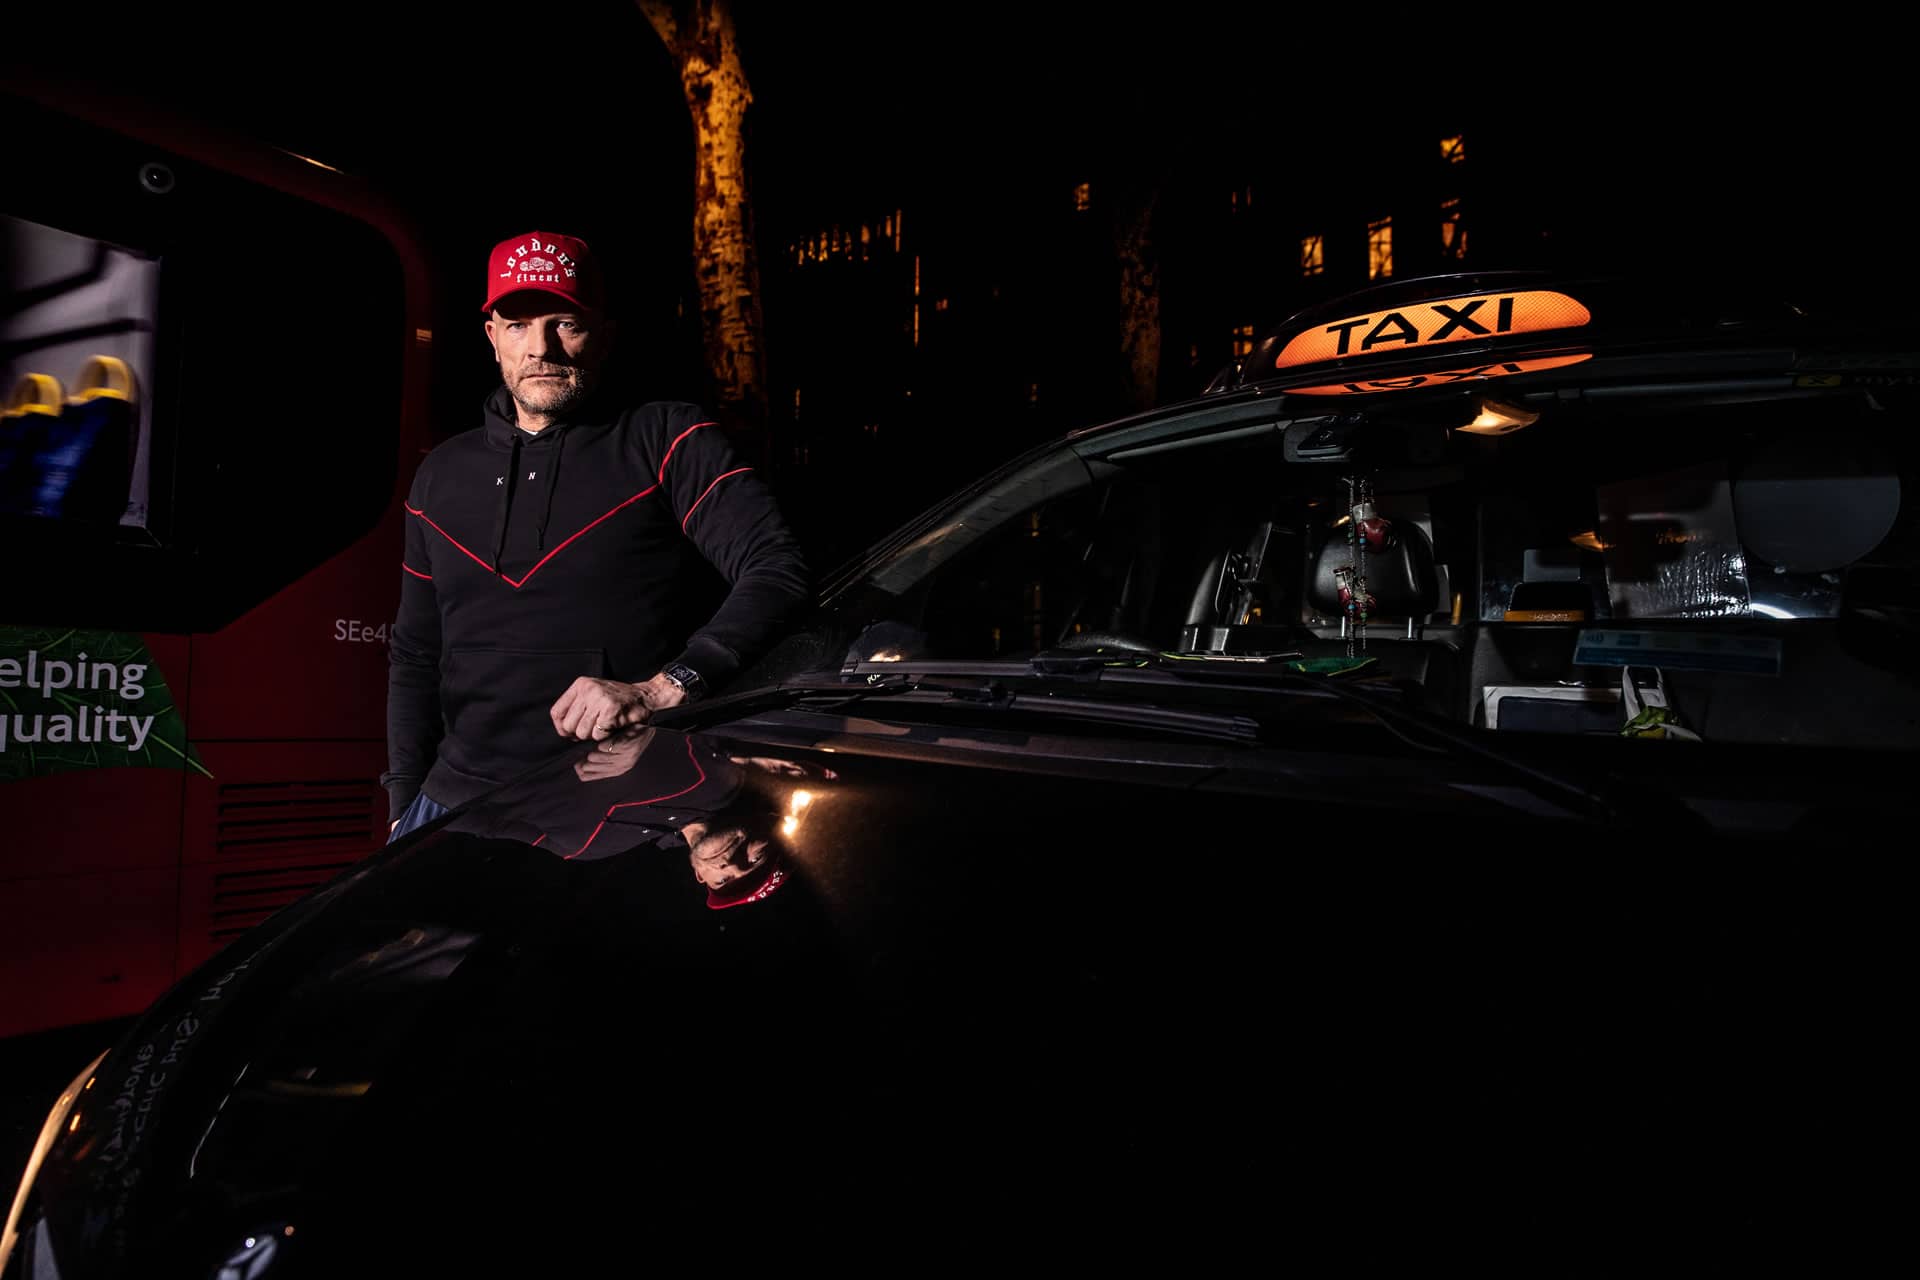 Cabbie wears King Apparel Whitechapel curved peak cap in crimson red and Tennyson tracksuit hoodie in black